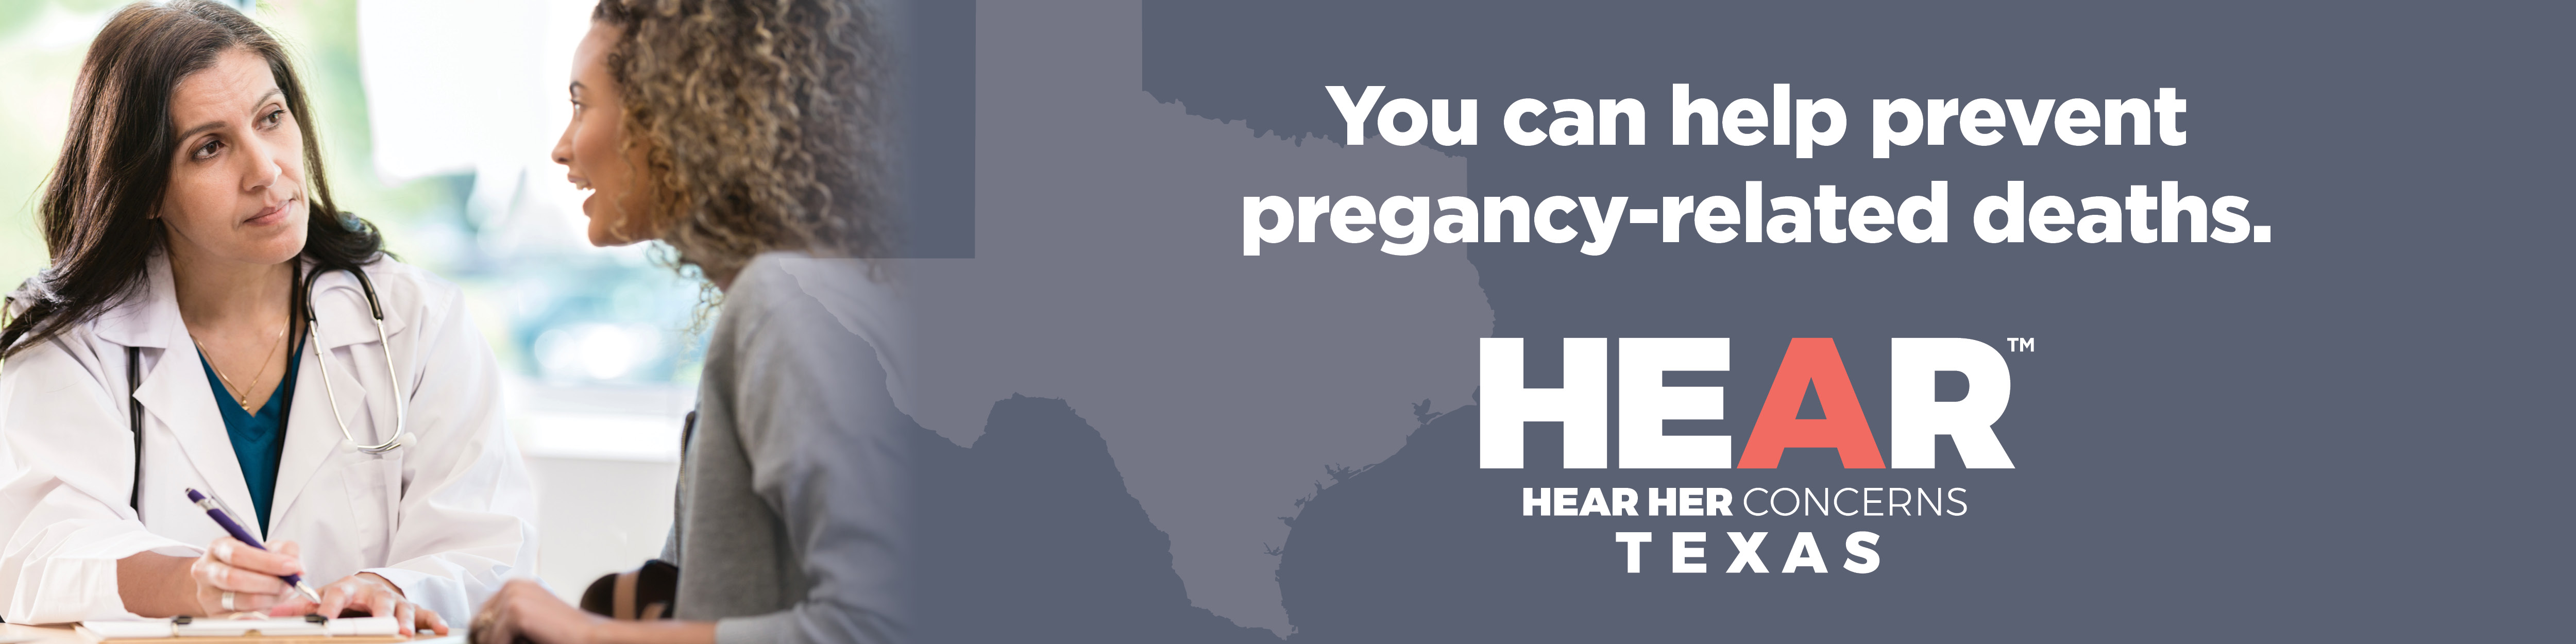 TX DSHS Website Banner. Health Care Professional talking to a woman. You can help prevent pregnancy-related deaths. 